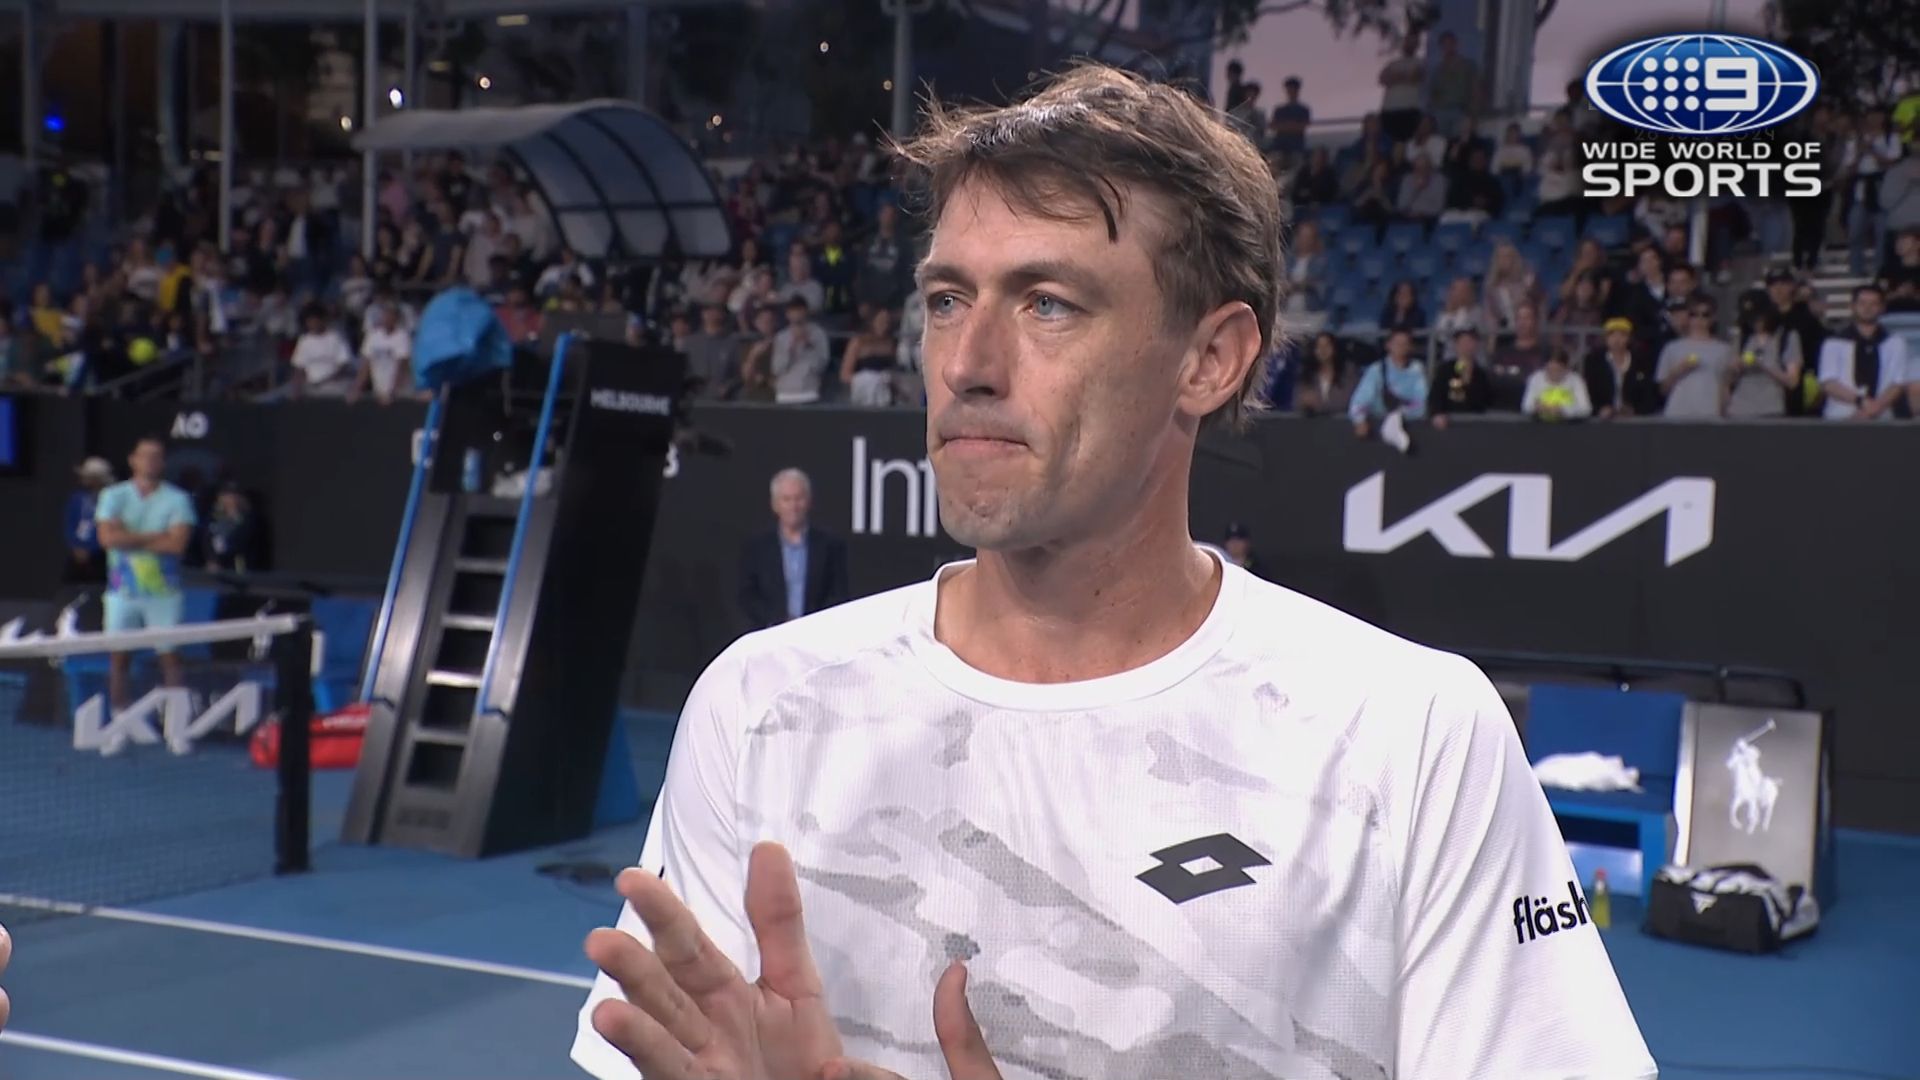 'I gave it a crack': Australian favourite John Millman closes curtains on special career